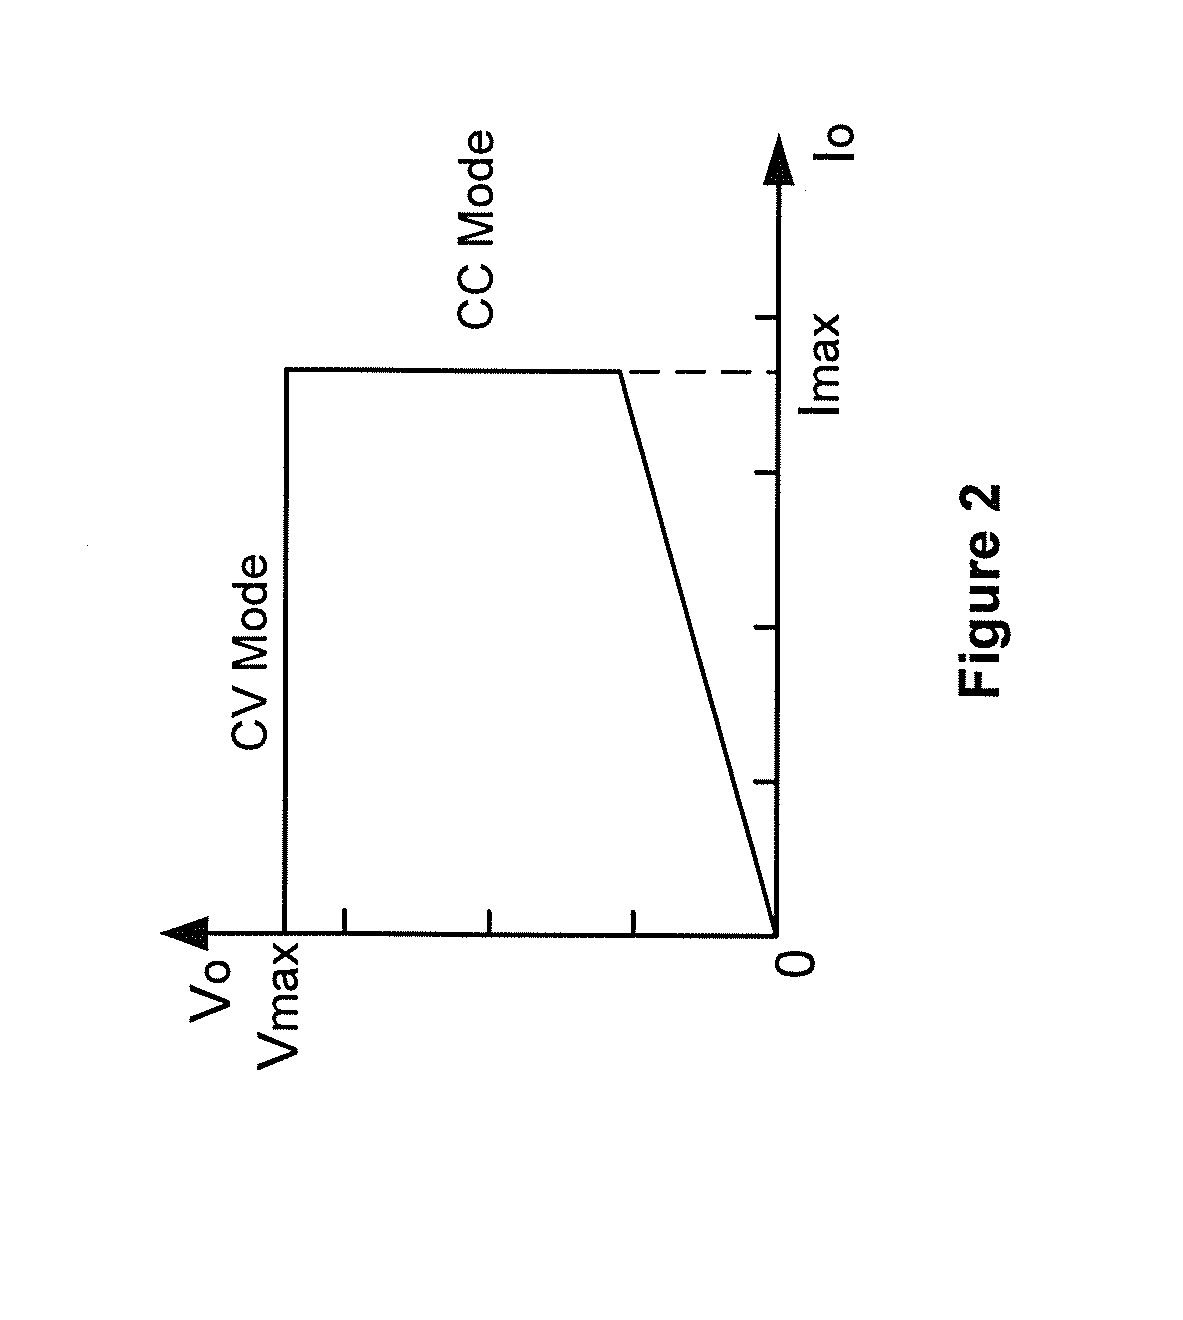 Systems and methods for constant voltage mode and constant current mode in flyback power converters with primary-side sensing and regulation